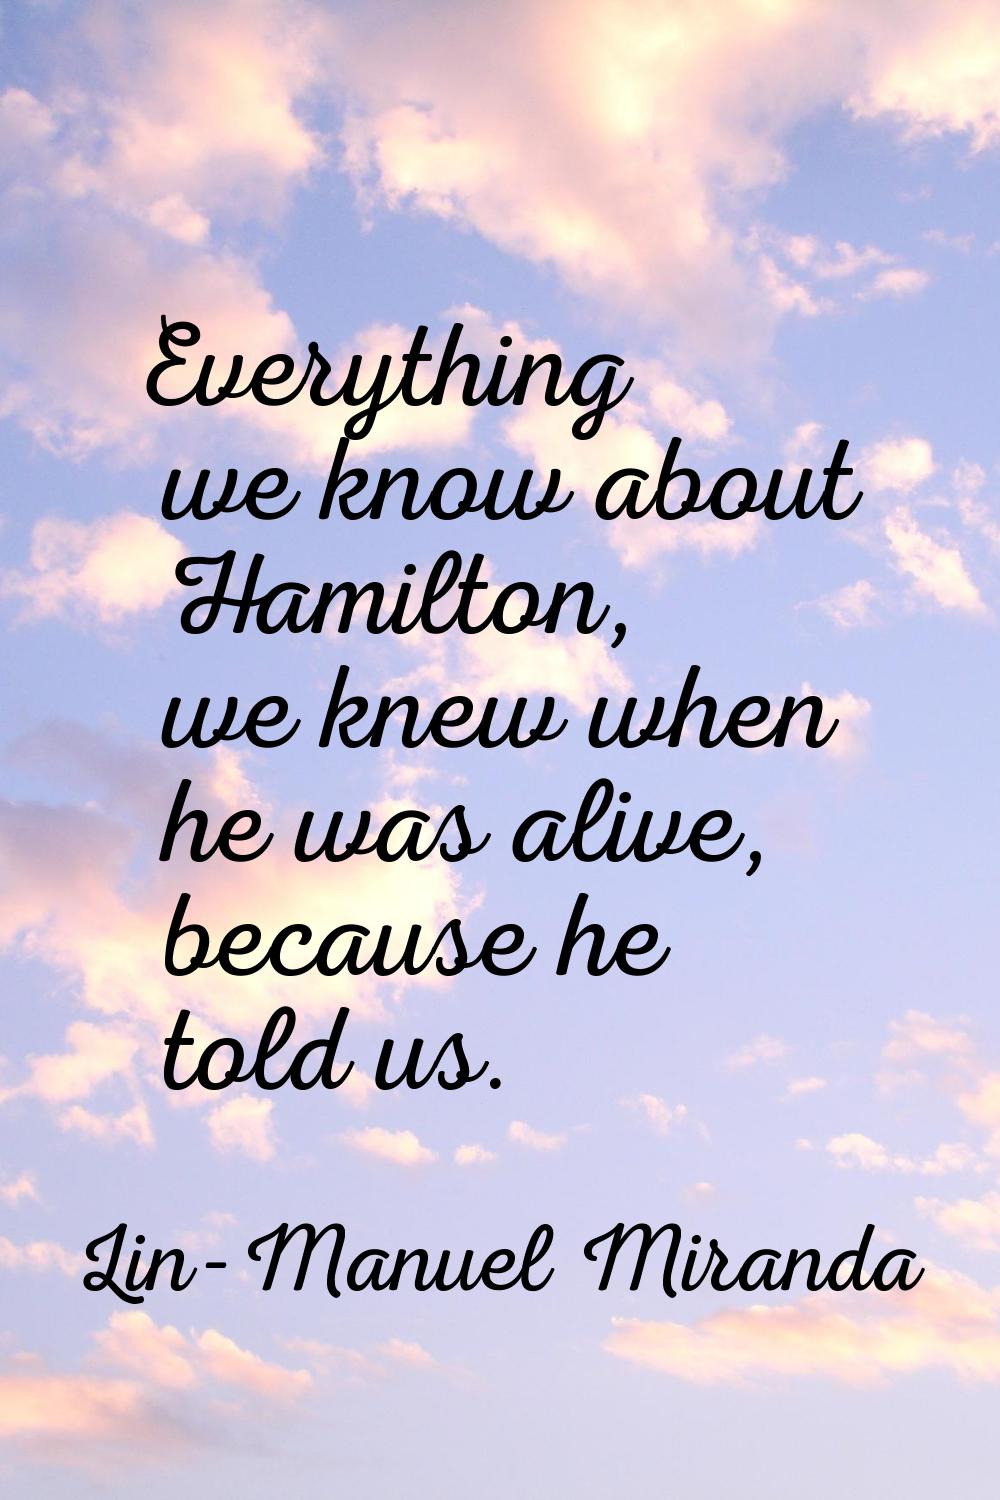 Everything we know about Hamilton, we knew when he was alive, because he told us.